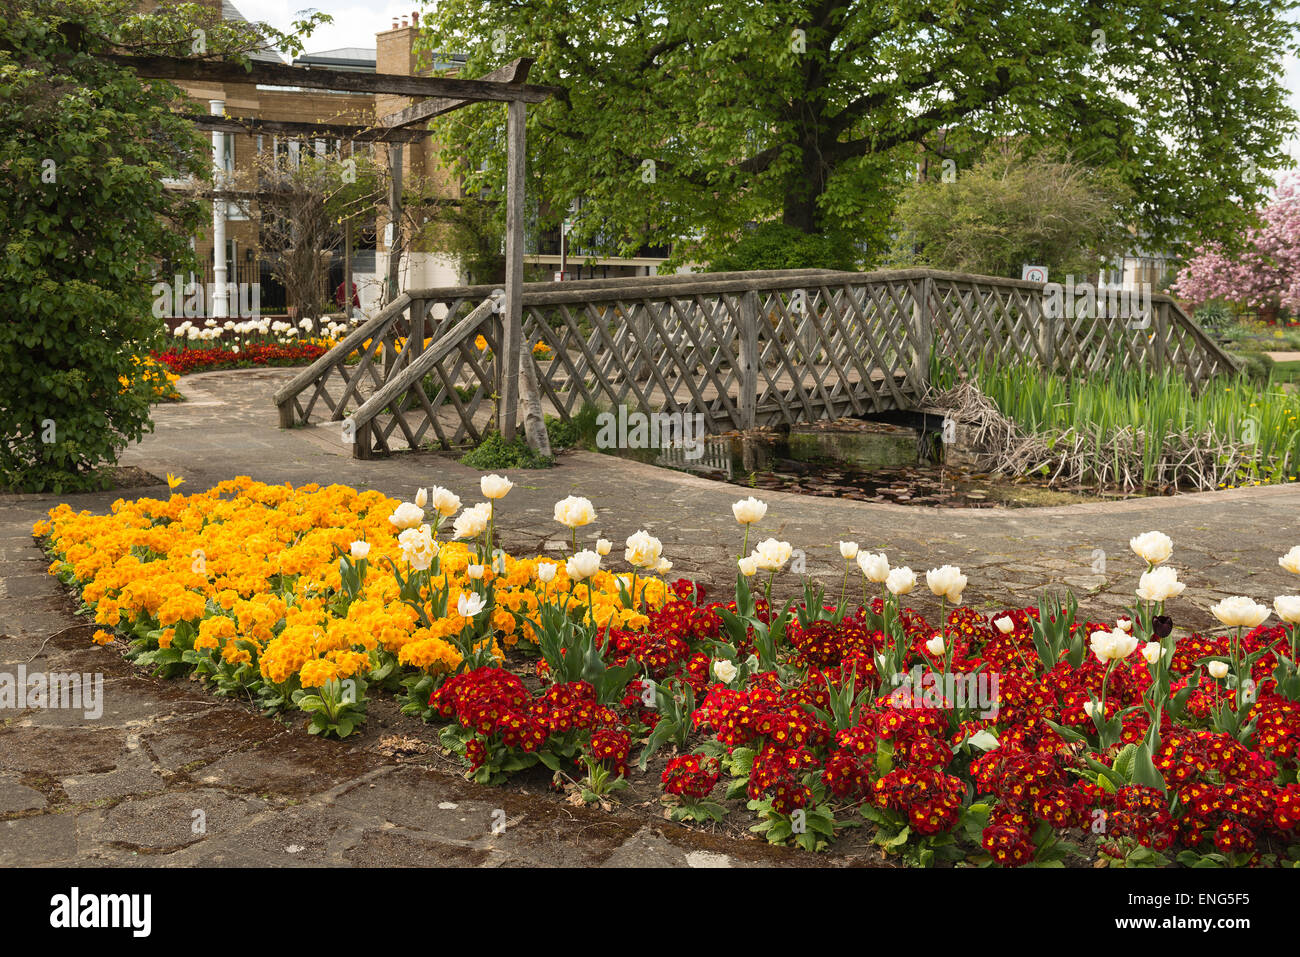 Spring bloom and bedding flowers add a sparkle of color at the Vine in Sevenoaks oldest cricket venue in England 1773 Stock Photo